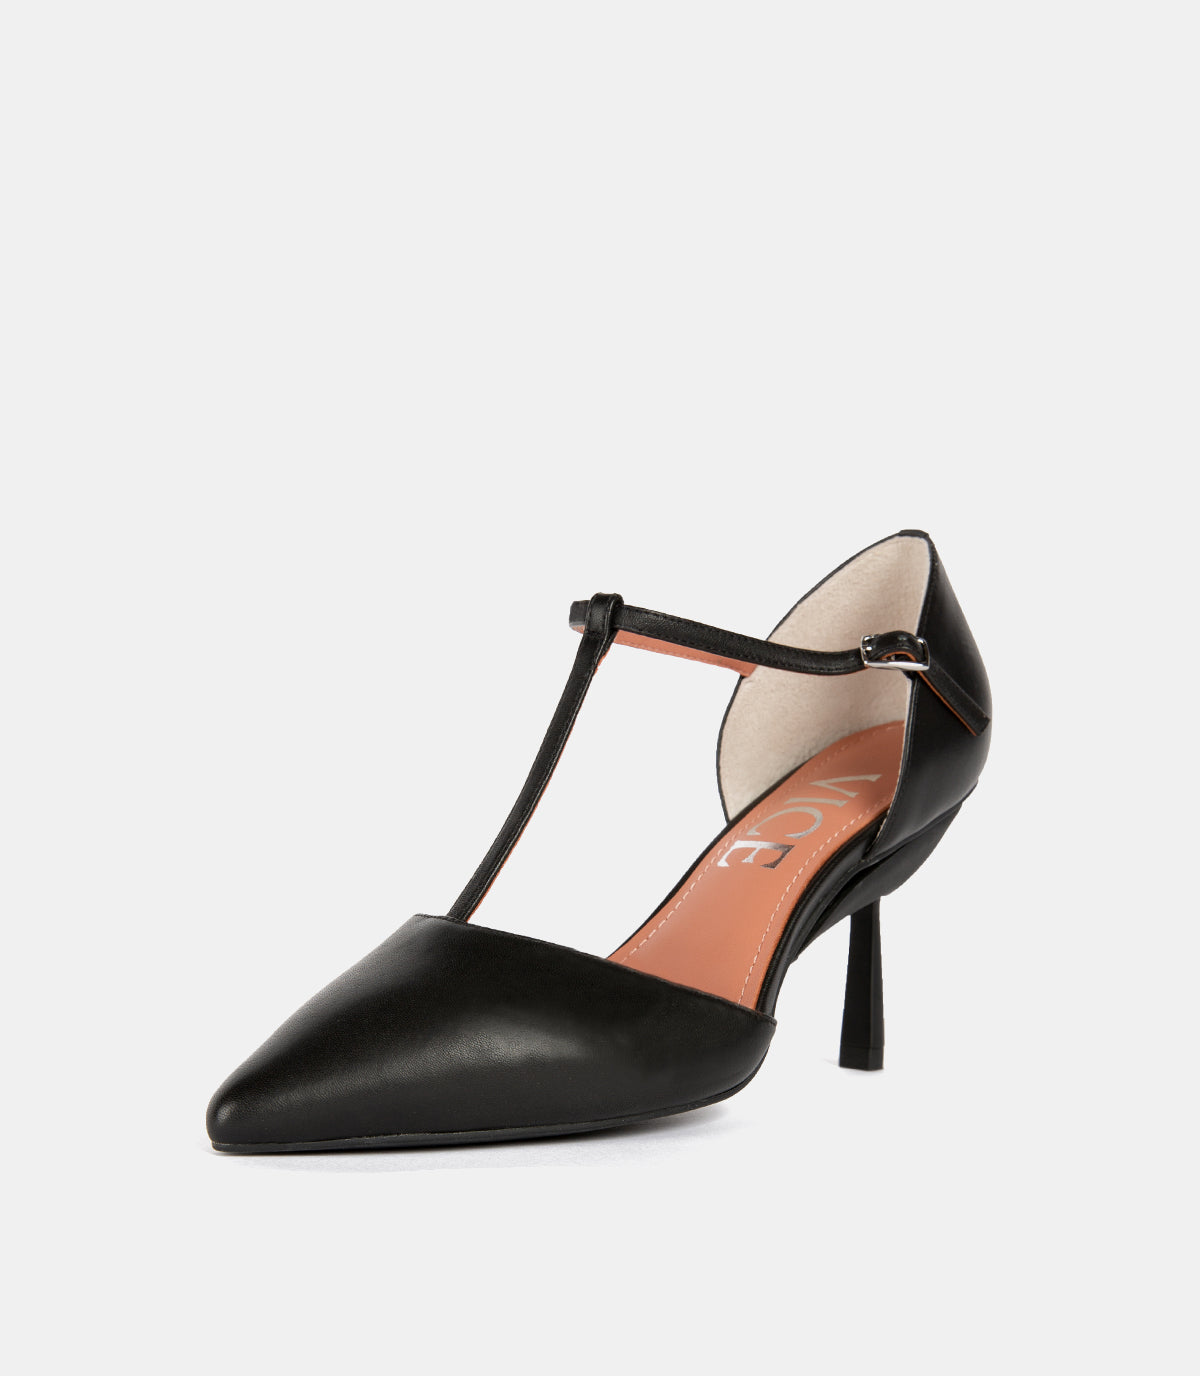 T Strap Black Leather Shoes, Black Patent Leather T Strap Heel